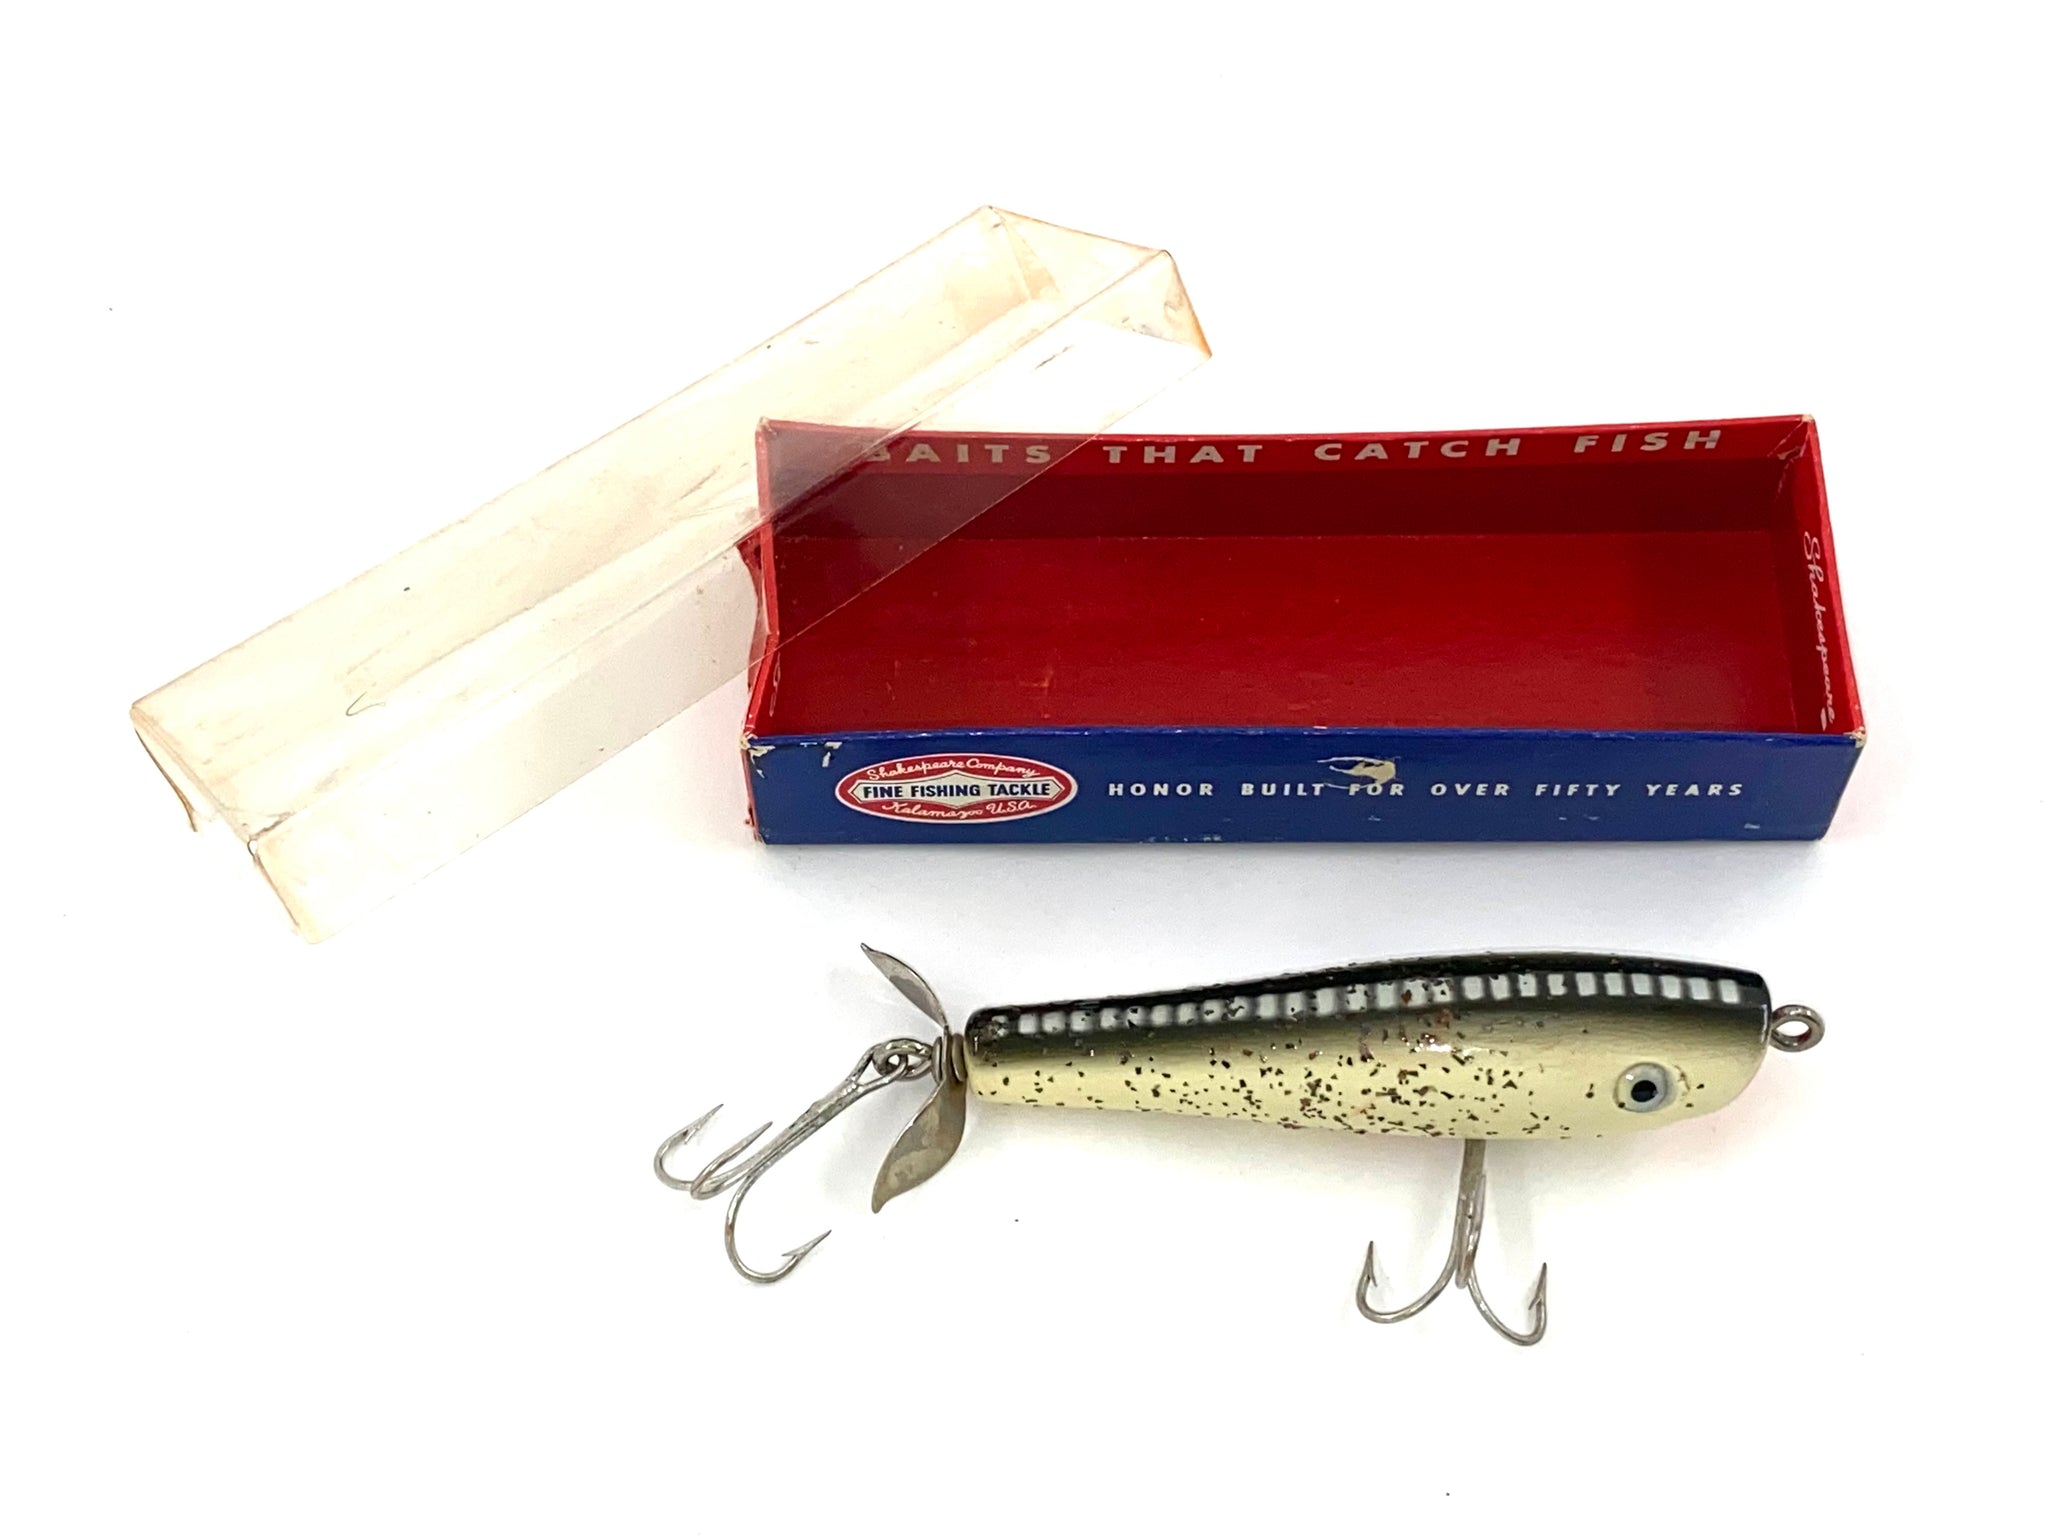 SHAKESPEARE SPECIAL Fishing Lure with Original Vintage Box • #6541